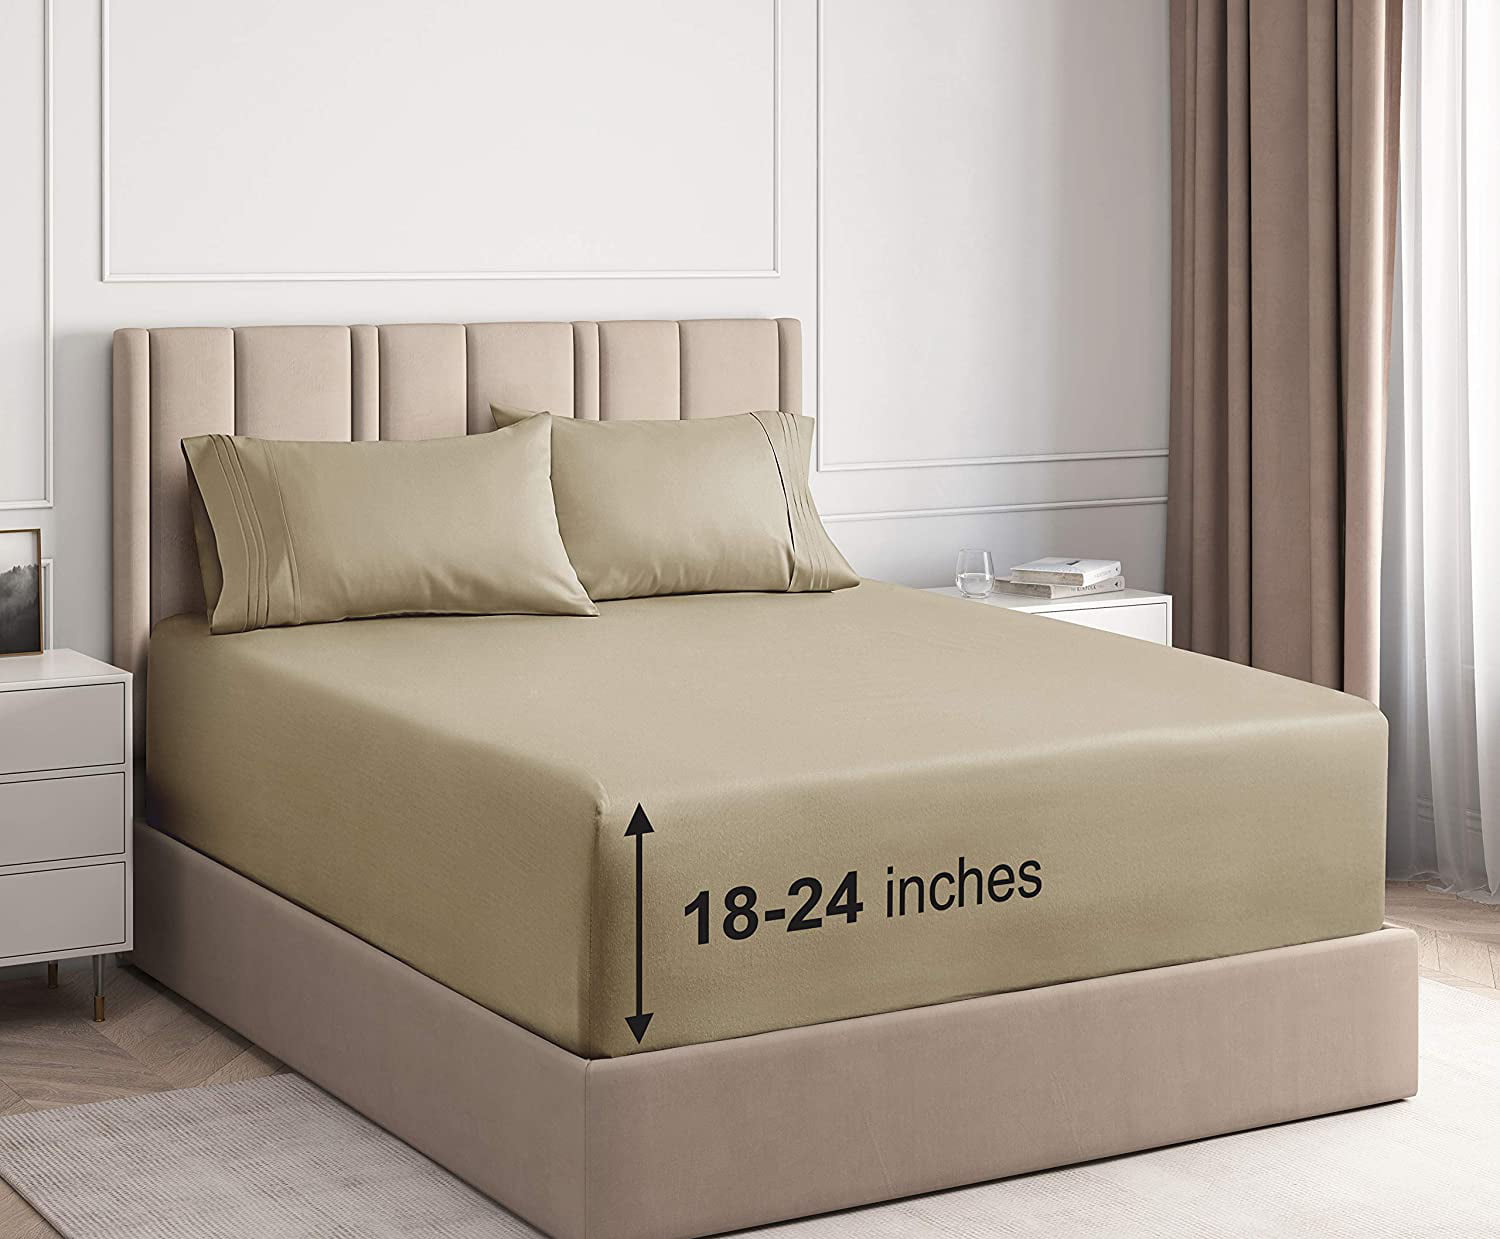 fitted sheets for 10 inch deep queen mattress